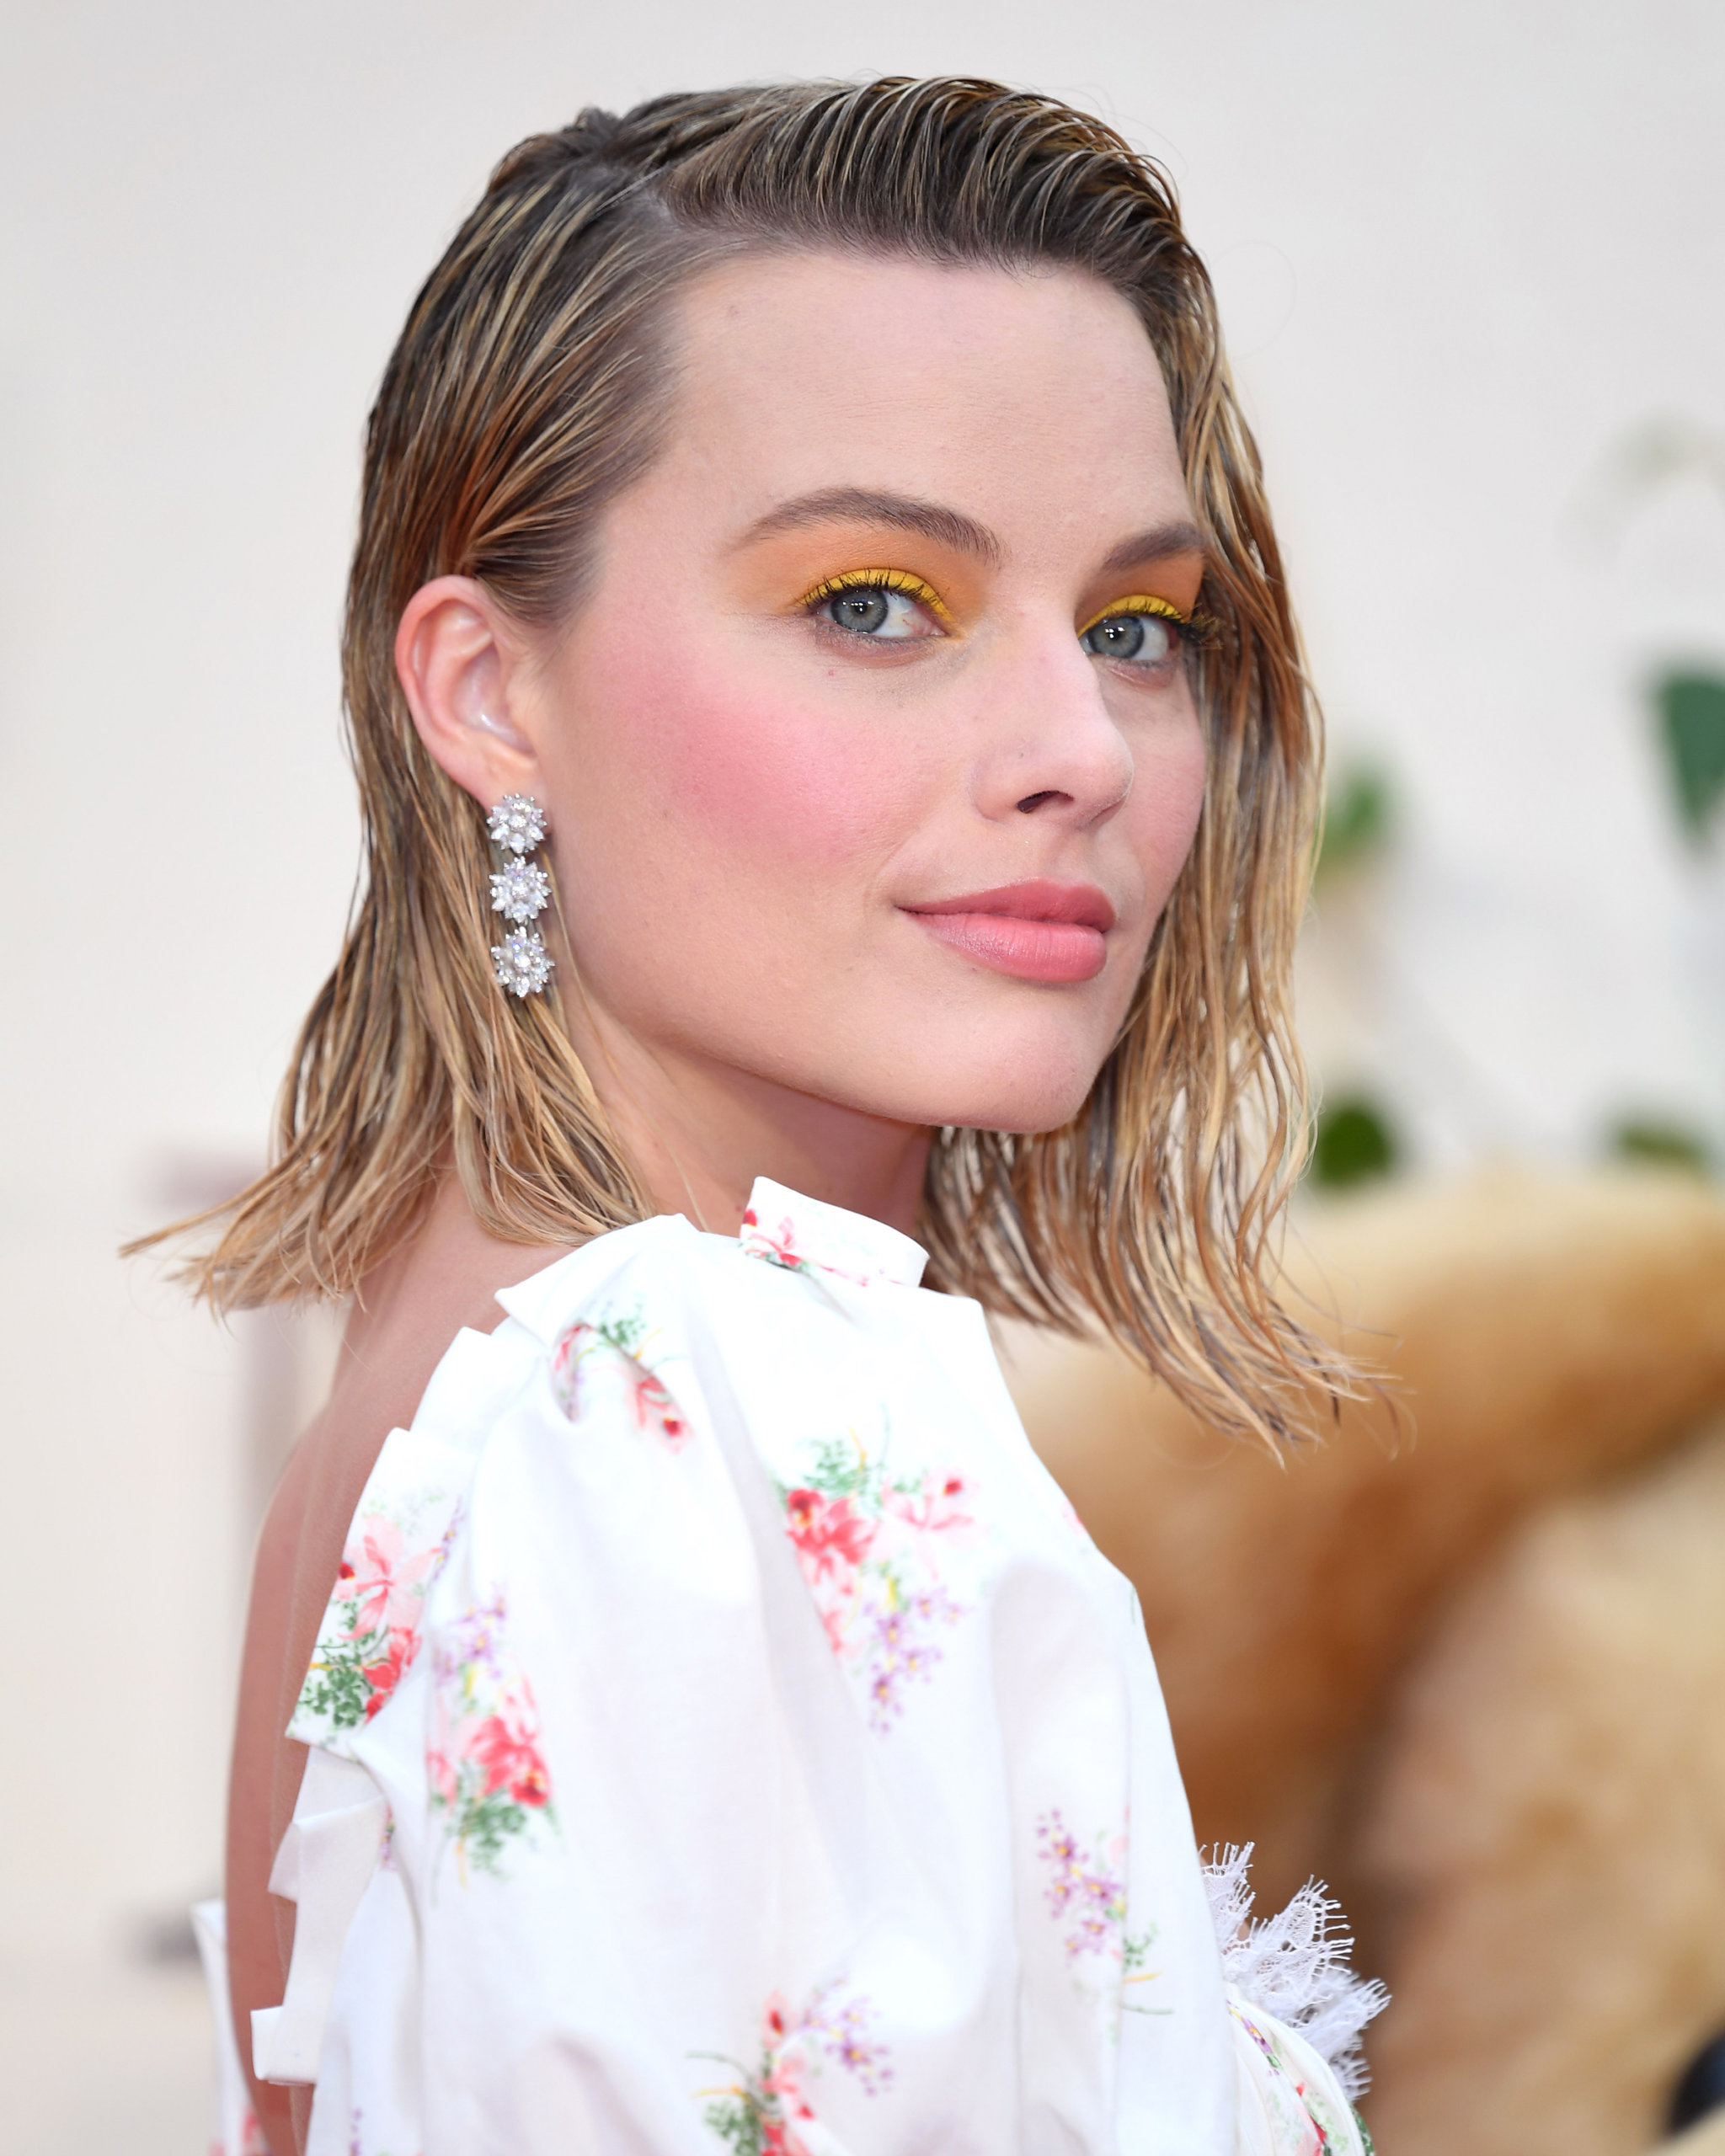 3 daisy diamond drop earrings with marquise cut diamonds worn by Margot Robbie at the premiere of Goodbye Christopher Robin